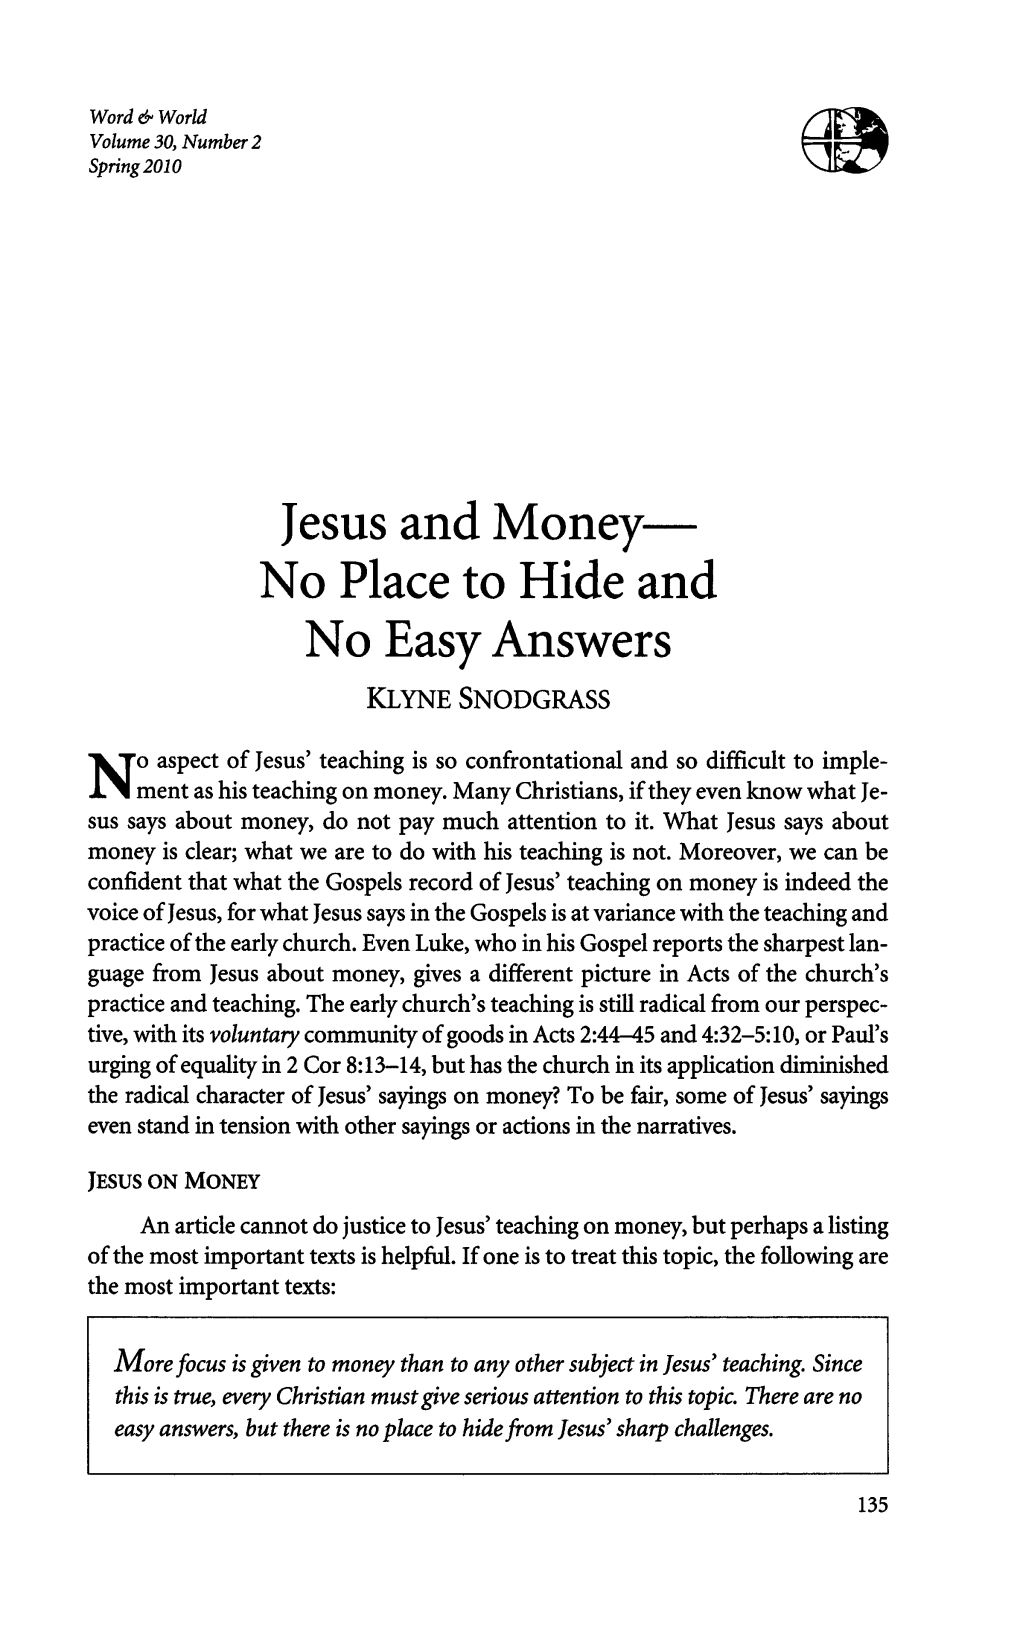 Jesus and Money— No Place to Hide and No Easy Answers KLYNE SNODGRASS